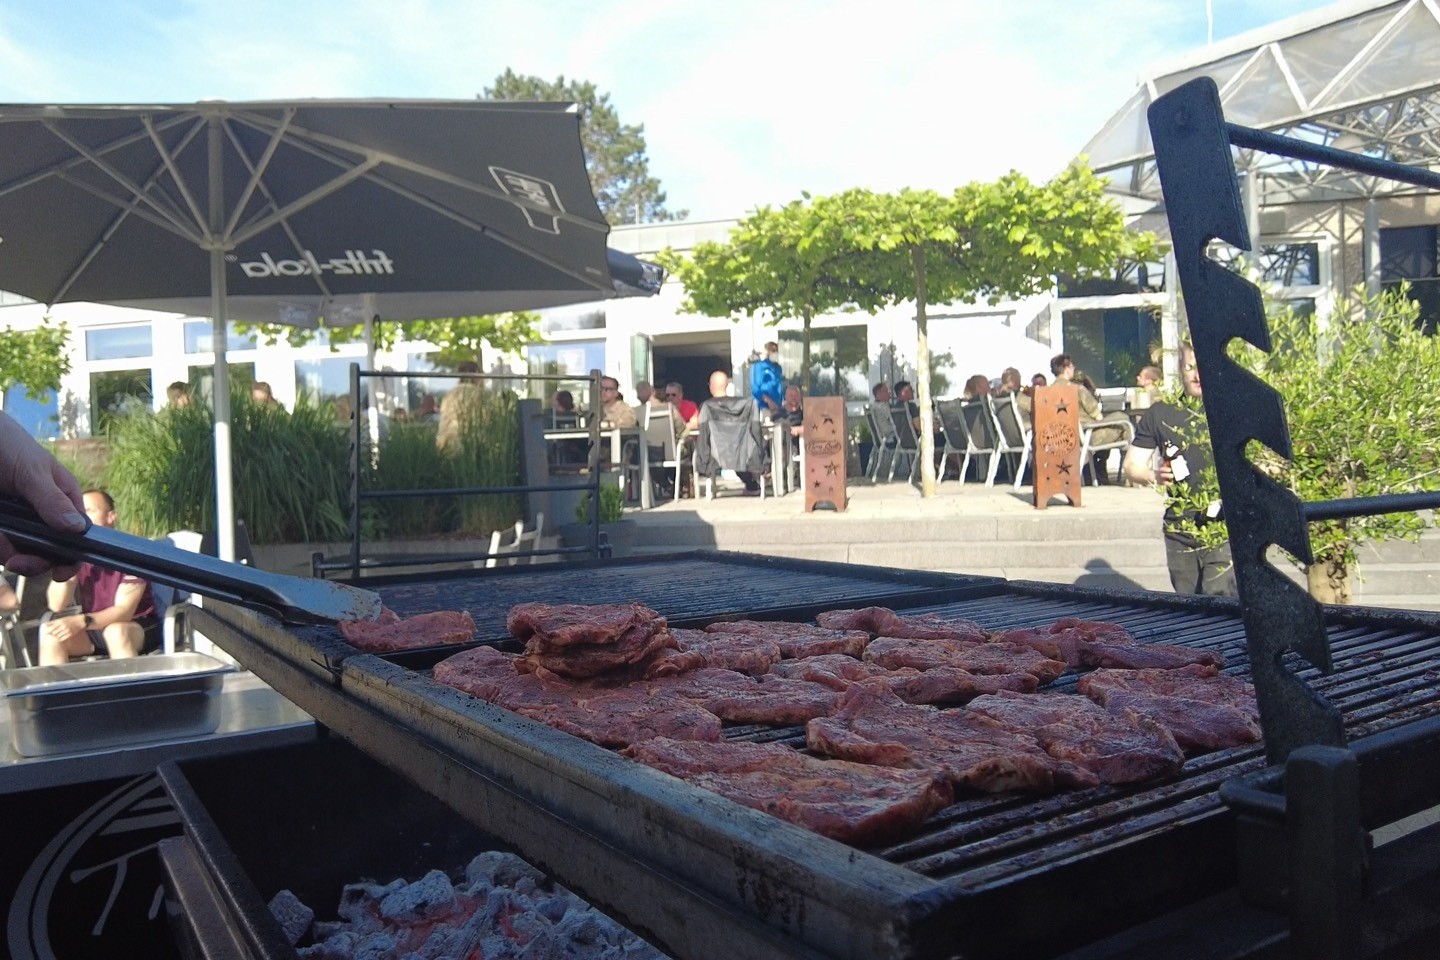 Time Out,Grill,More,Warendorf,Gastronomie,Andy Ullwer, Bratwurst,Steak,Burger,Kneipe,Terrasse,